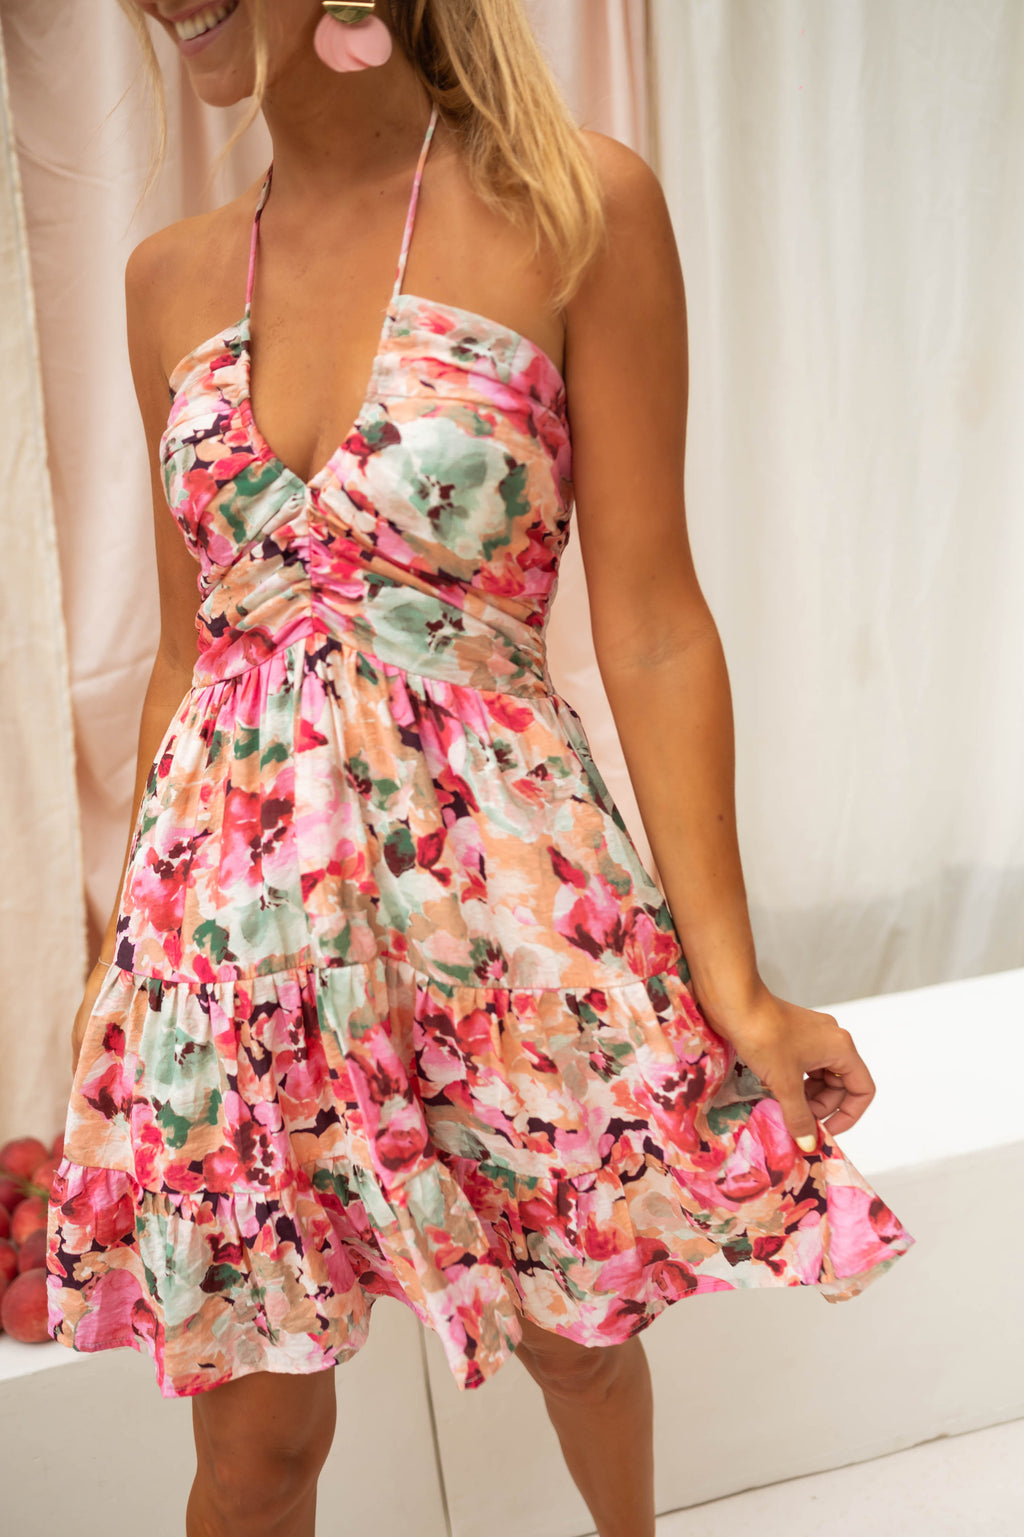 Alicia dress - with flowers